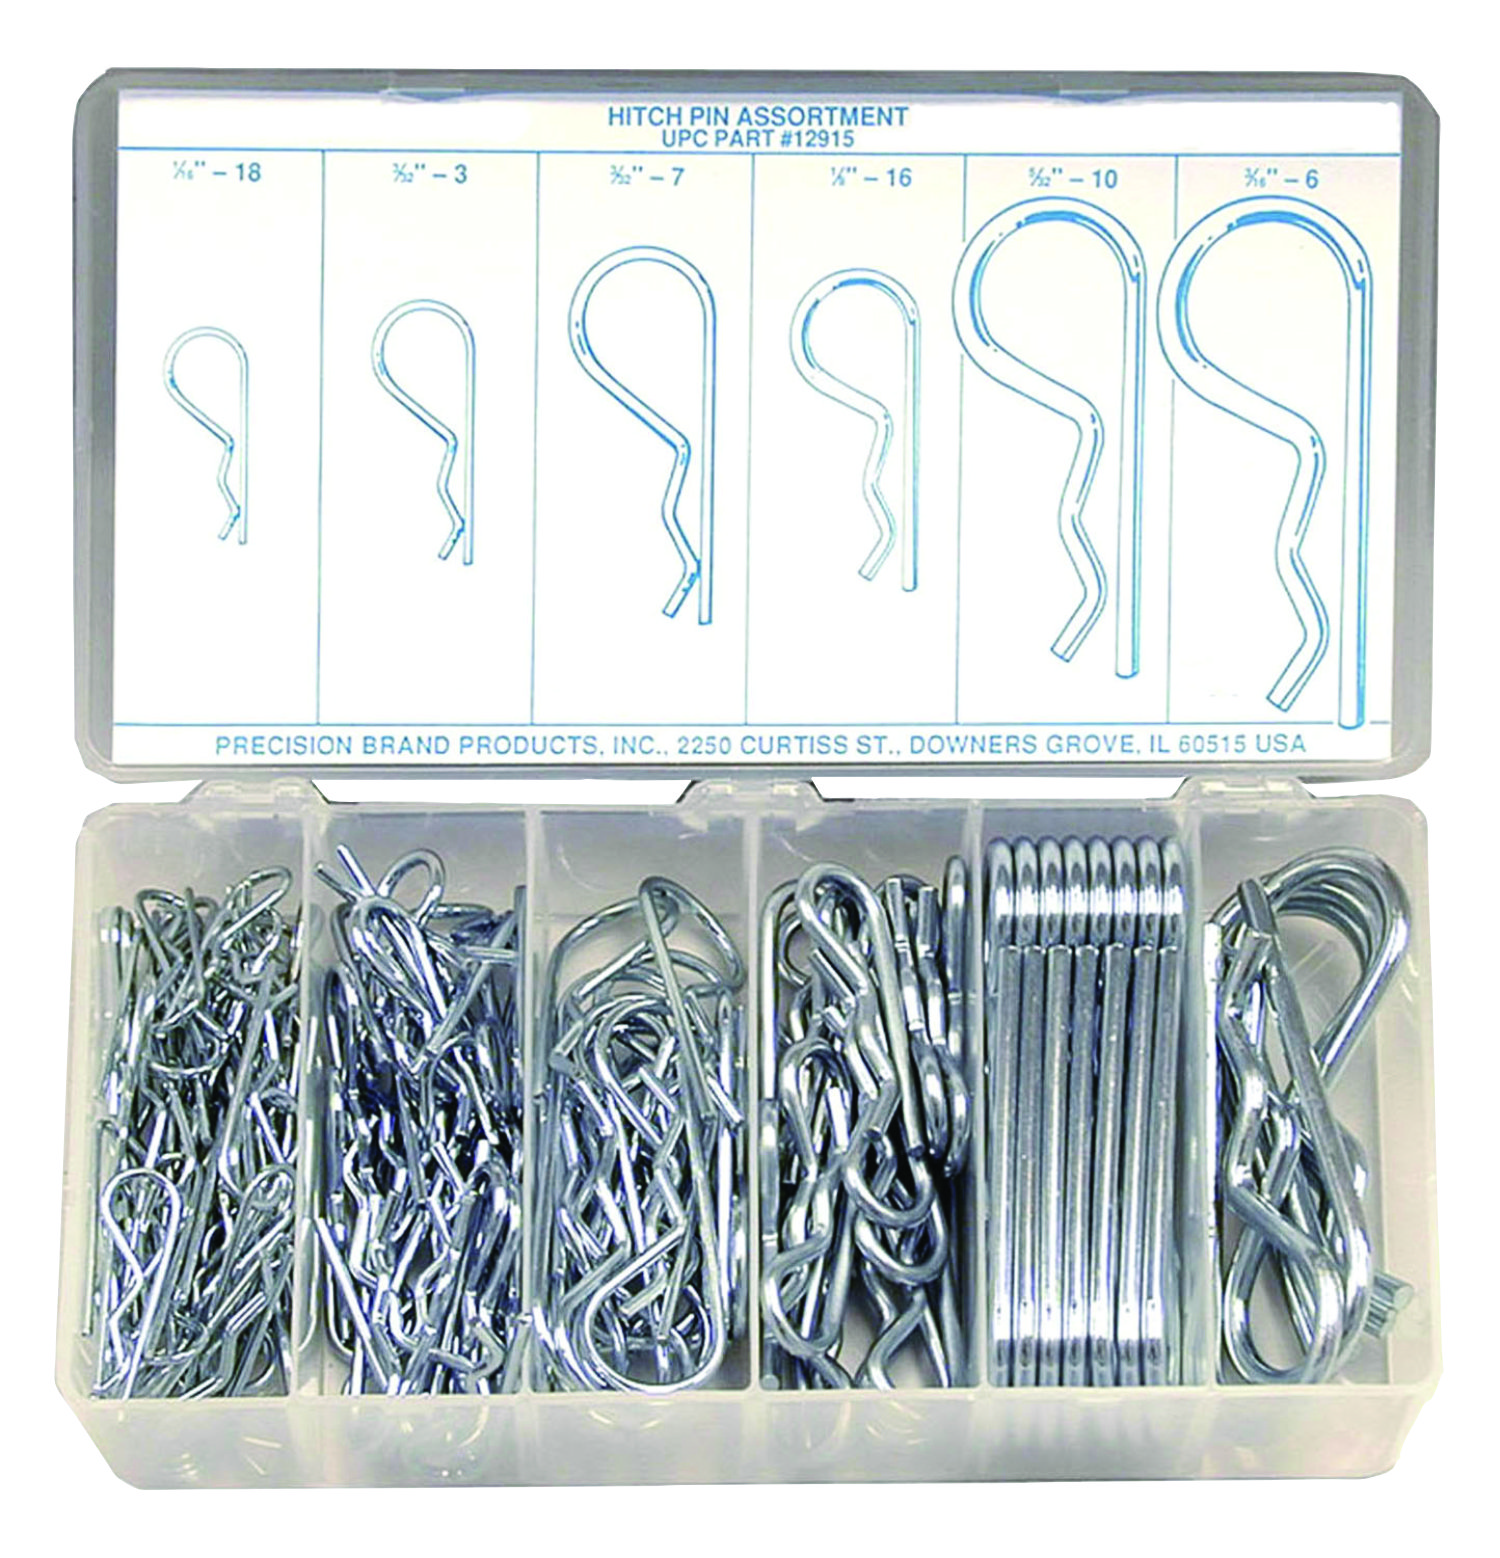 150 Piece Hitch Pin Clip Assortment - Made in USA Tools